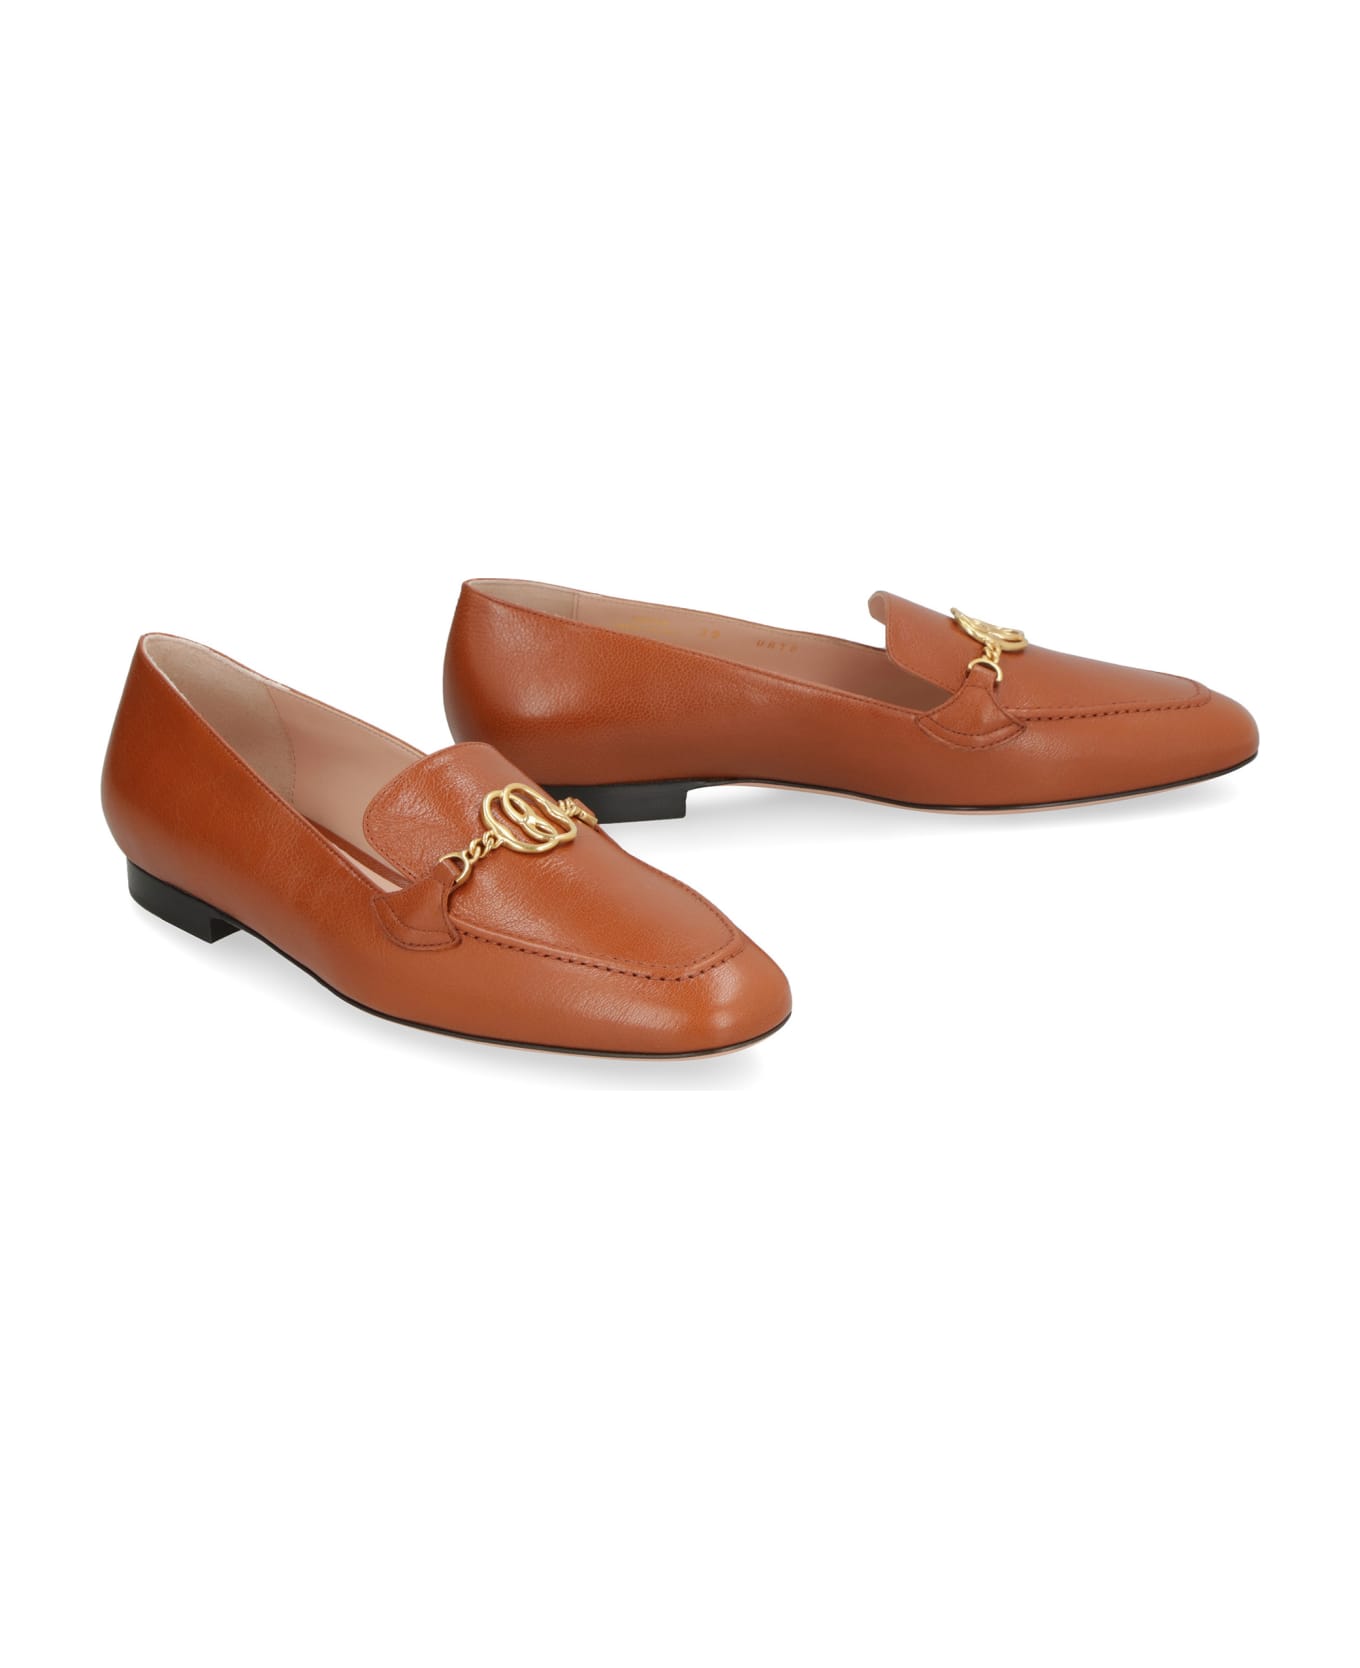 Bally Obrien Leather Loafers - brown